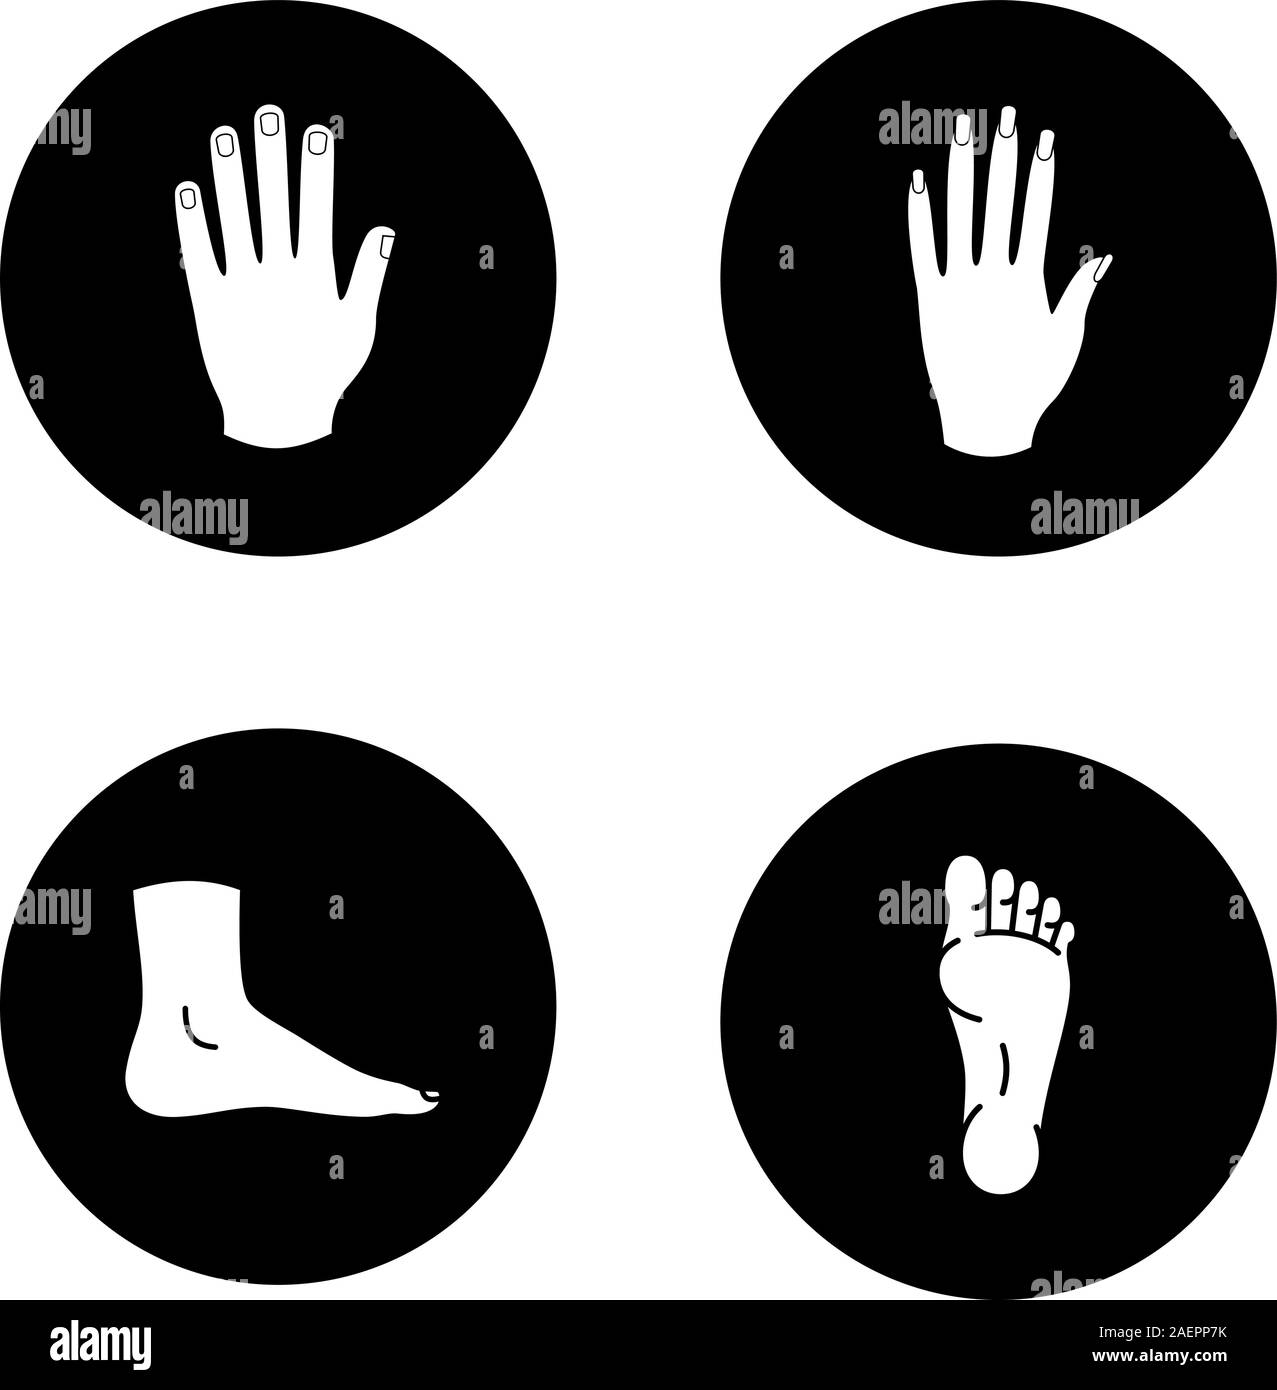 Human body parts glyph icons set. Male and female hands, feet. Vector ...